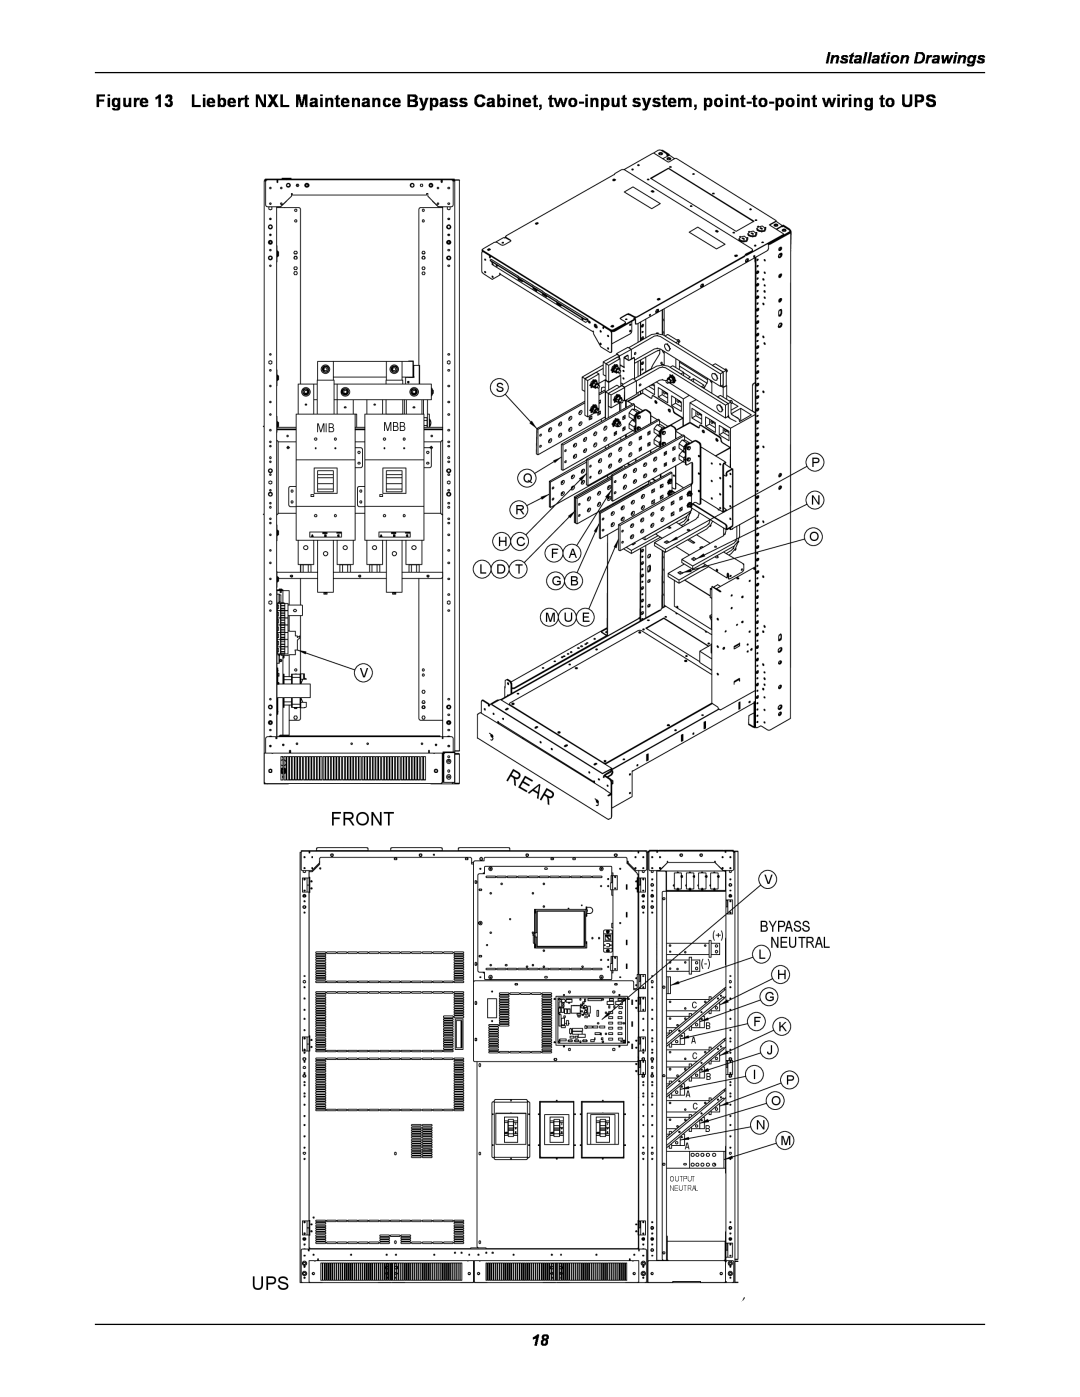 Emerson UPS Systems installation manual Front, Installation Drawings, Bypass 